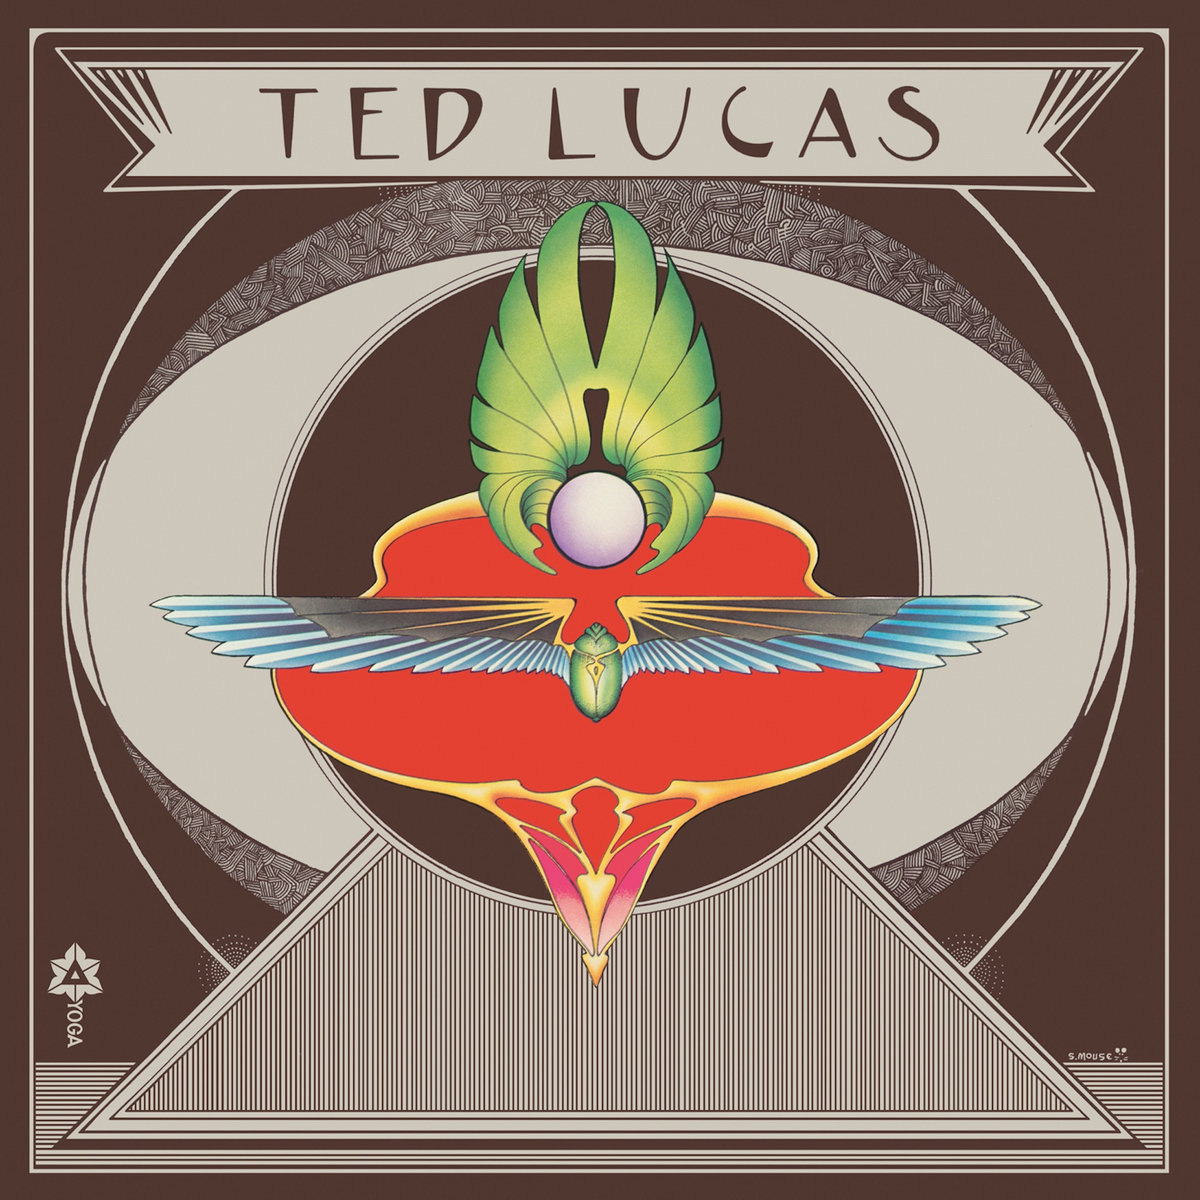 The album cover for Ted Lucas' self-titled album, featuring a winged green scarab beetle over a psychedelic red insignia on a brown background.